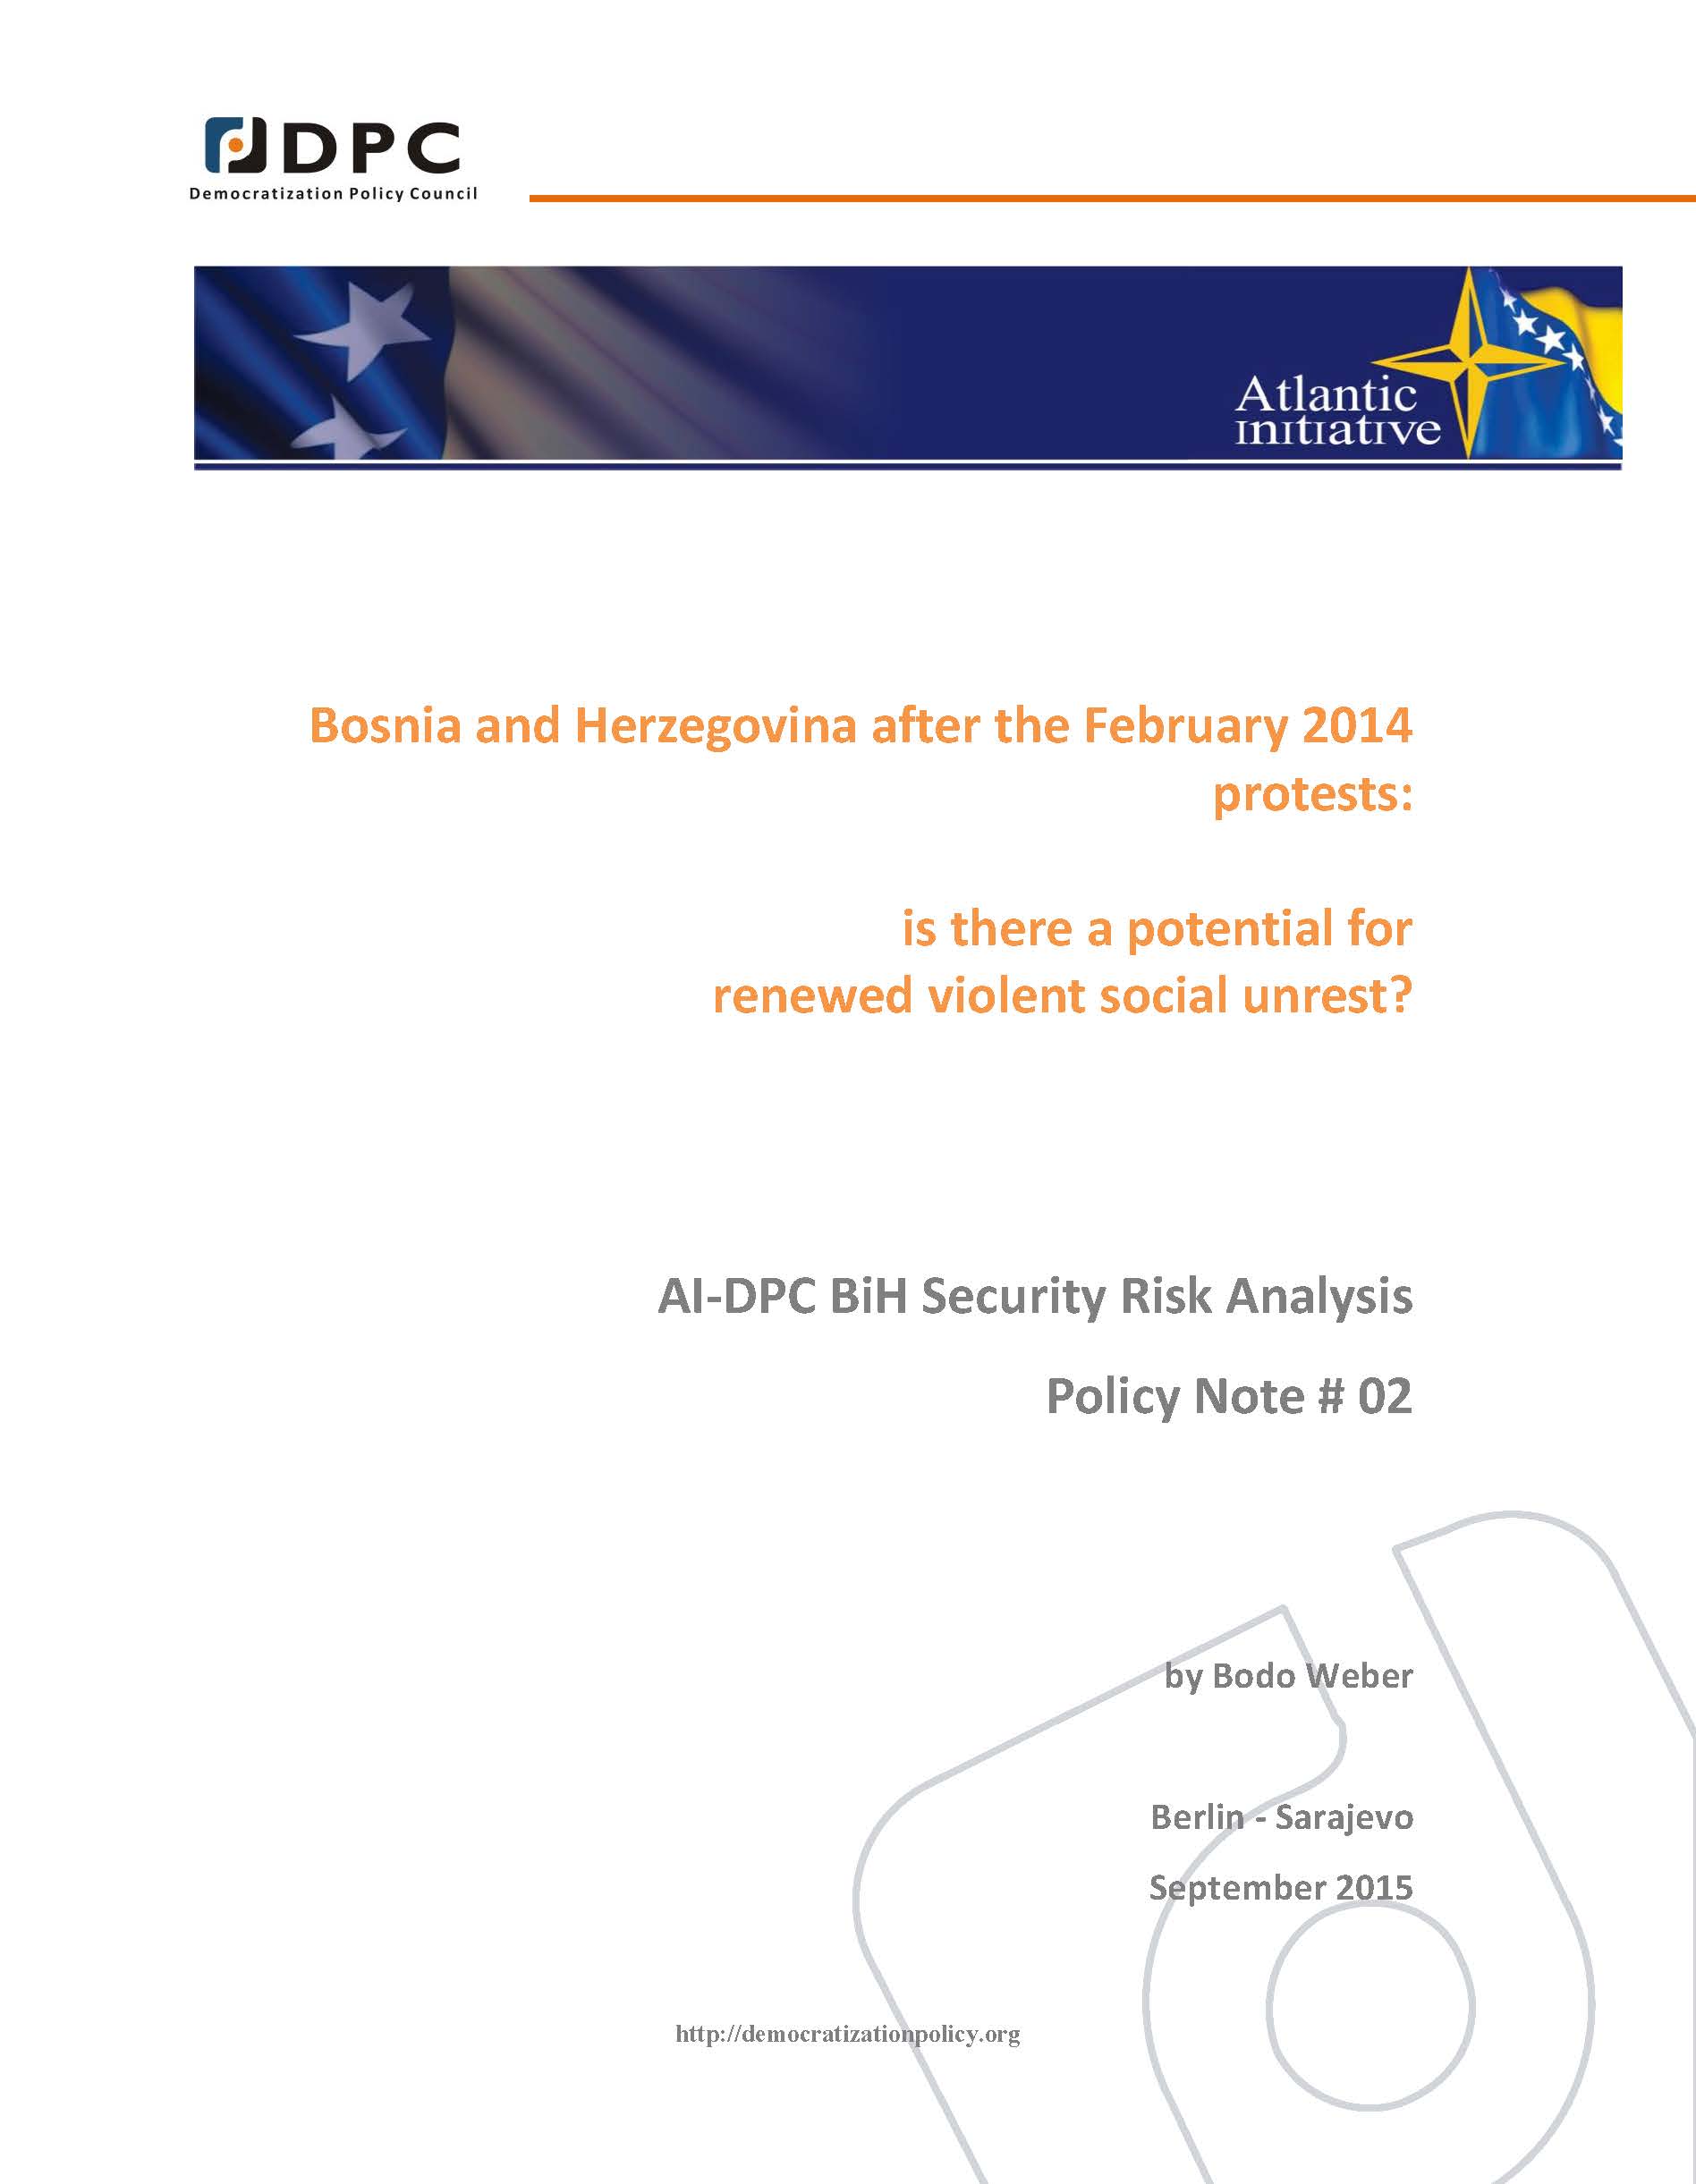 AI-DPC BiH SECURITY ANALYSIS POLICY NOTE 02: Bosnia and Herzegovina after the February 2014 protests: is there a potential for renewed violent social unrest? Cover Image